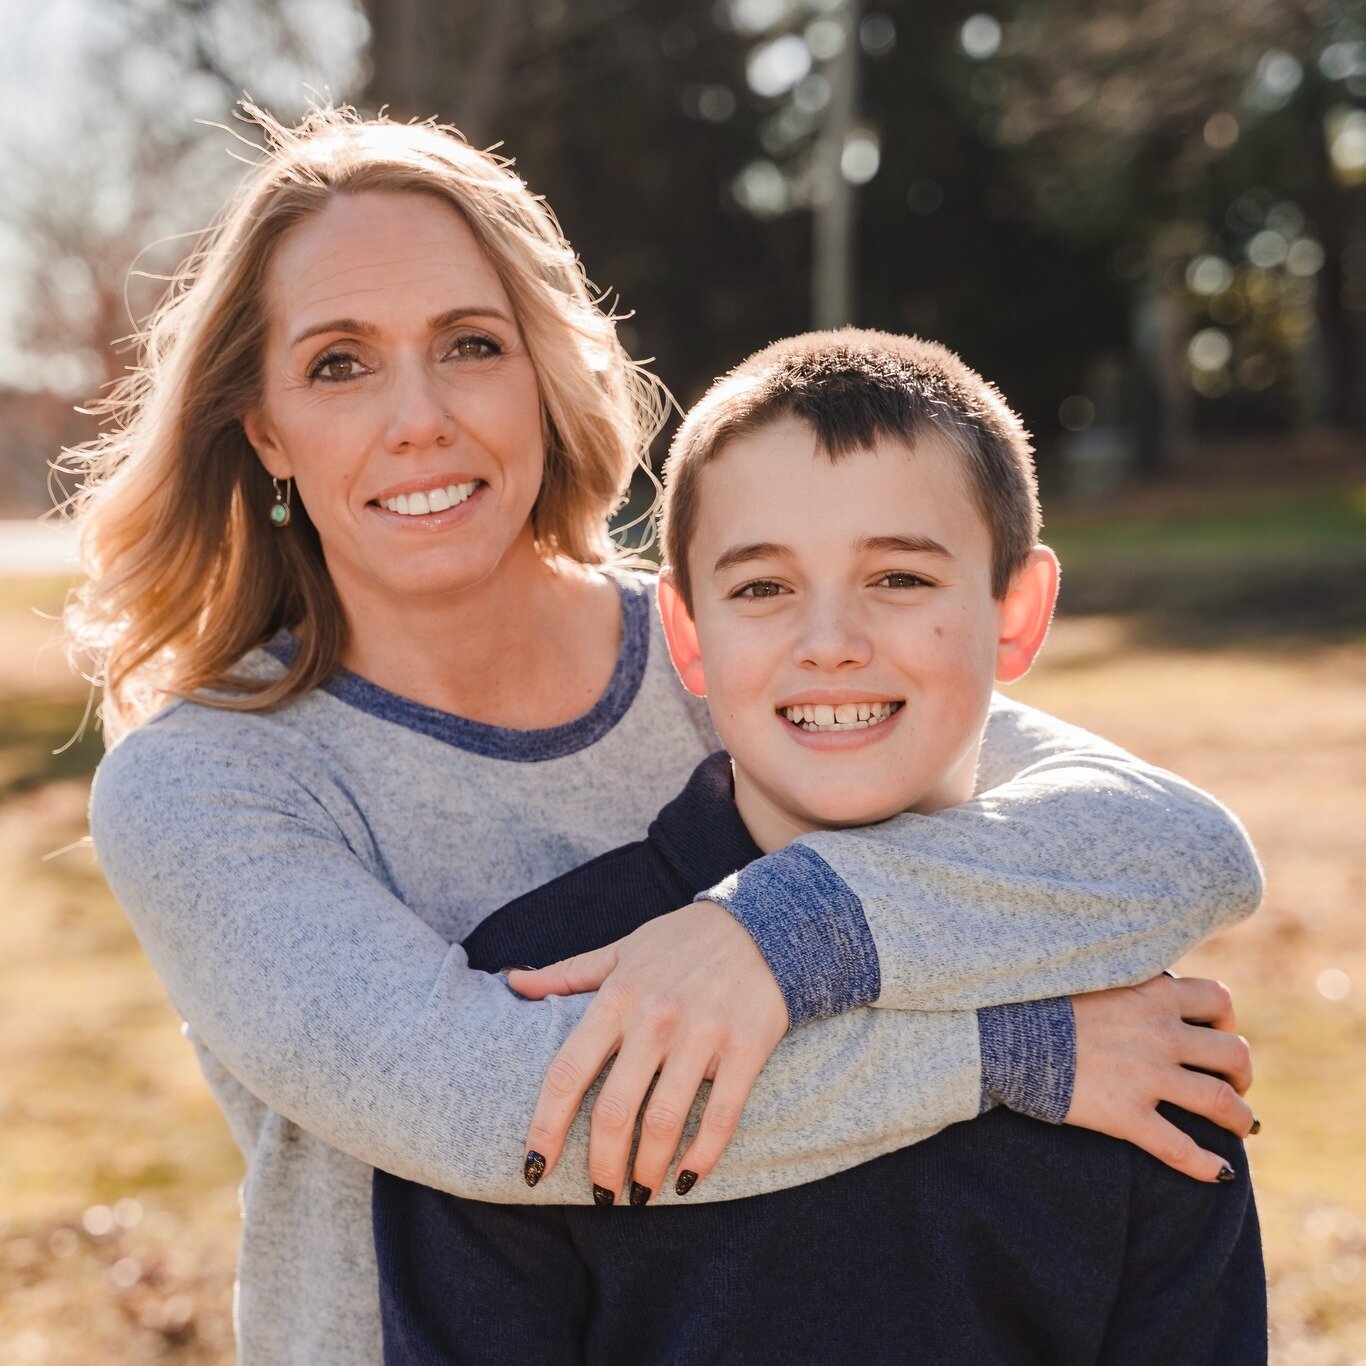 I will always have a sweet spot for a Mother and Son Combo. This Little guy totally rocked this shoot like he was an absolute model. We had so much fun! Plus there was a dog!